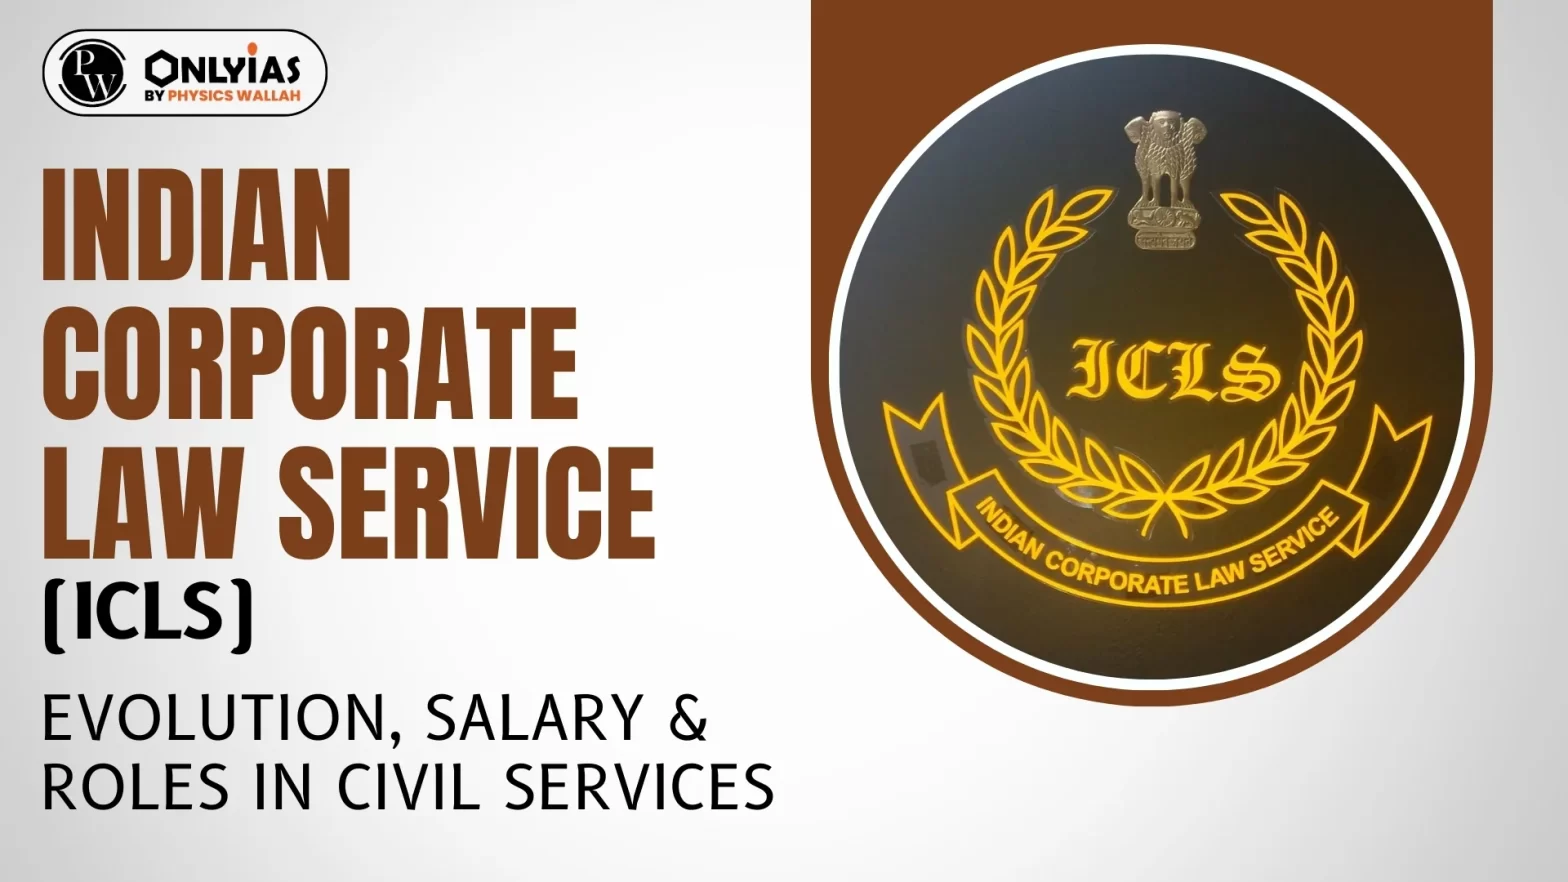 Indian Corporate Law Service (ICLS): Evolution, Salary & Roles in Civil Services